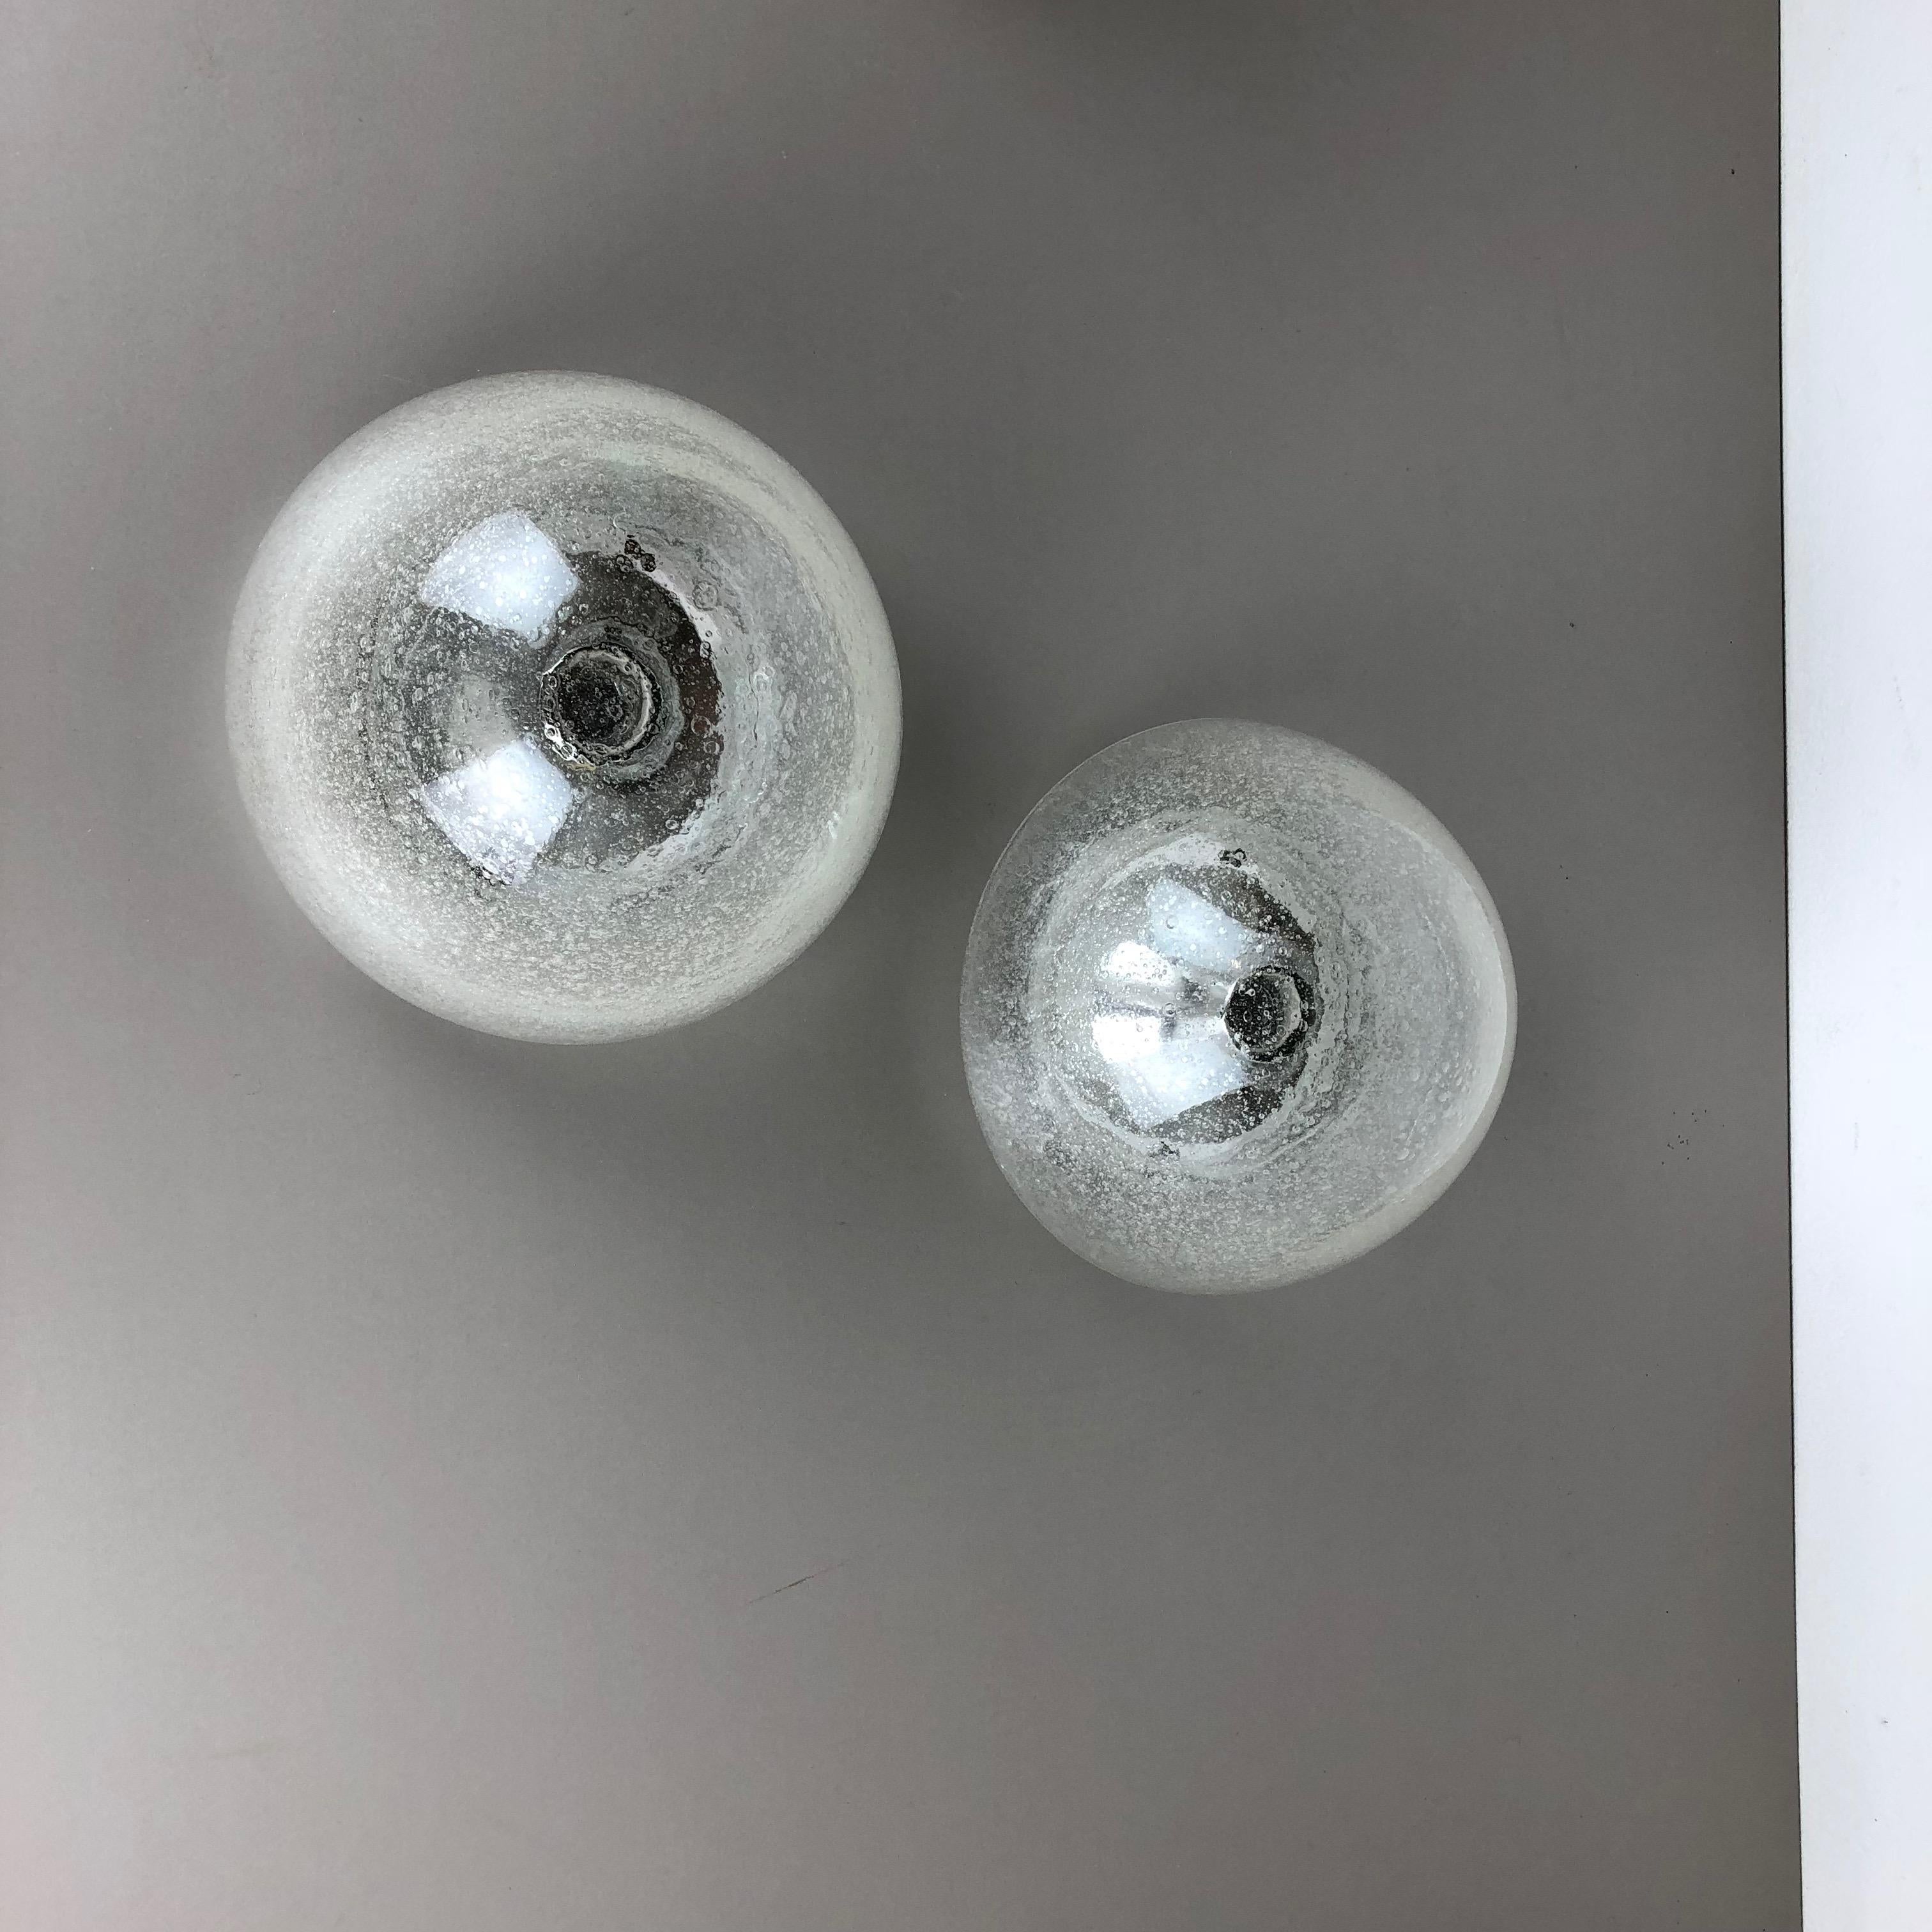 Article:

wall light sconce set of 2


Producer:

Hoffmeister Leuchten, Germany



Origin:

Germany



Age:

1970s



Description:

original set of 2 modernist german wall Lights made of high quality glass in cone form with